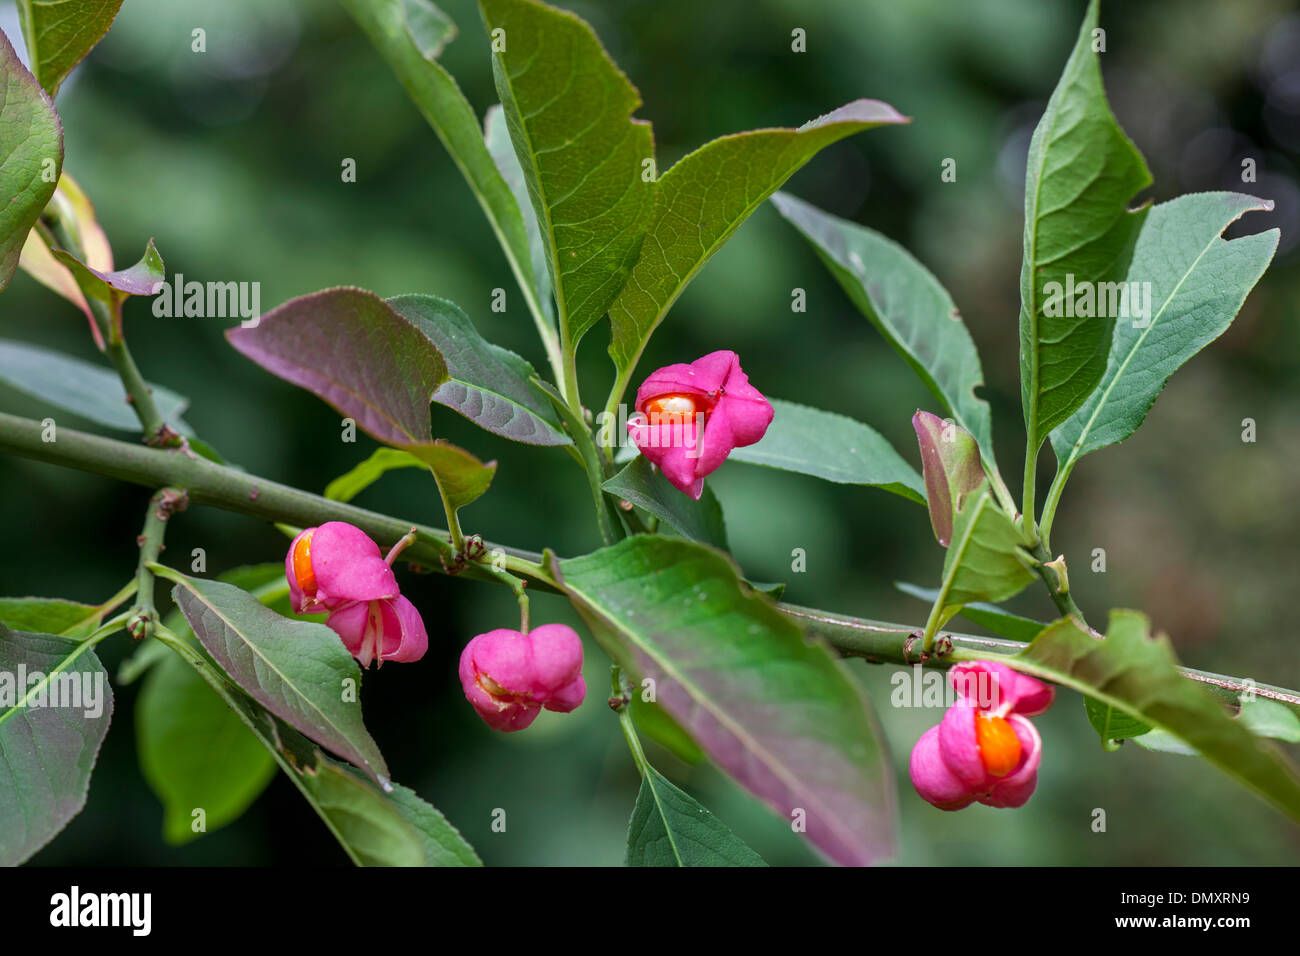 European spindle / common spindle (Euonymus europaeus) close-up of ripe fruit showing bright orange seeds Stock Photo